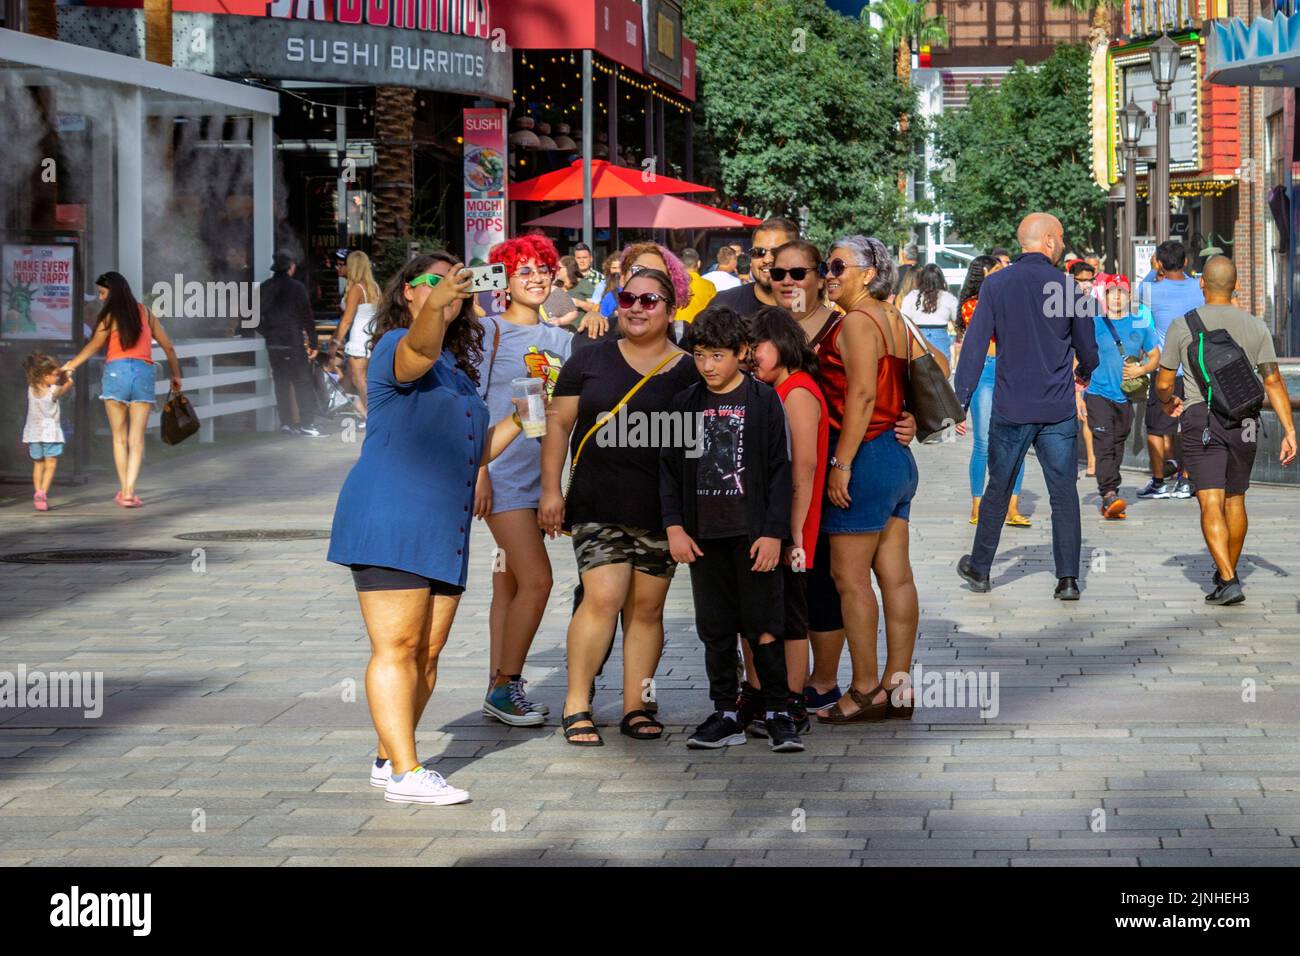 Capture the excitement and energy of Las Vegas with this image of a group of tourists stopping to take photos of themselves at The LINQ Promenade. The Stock Photo